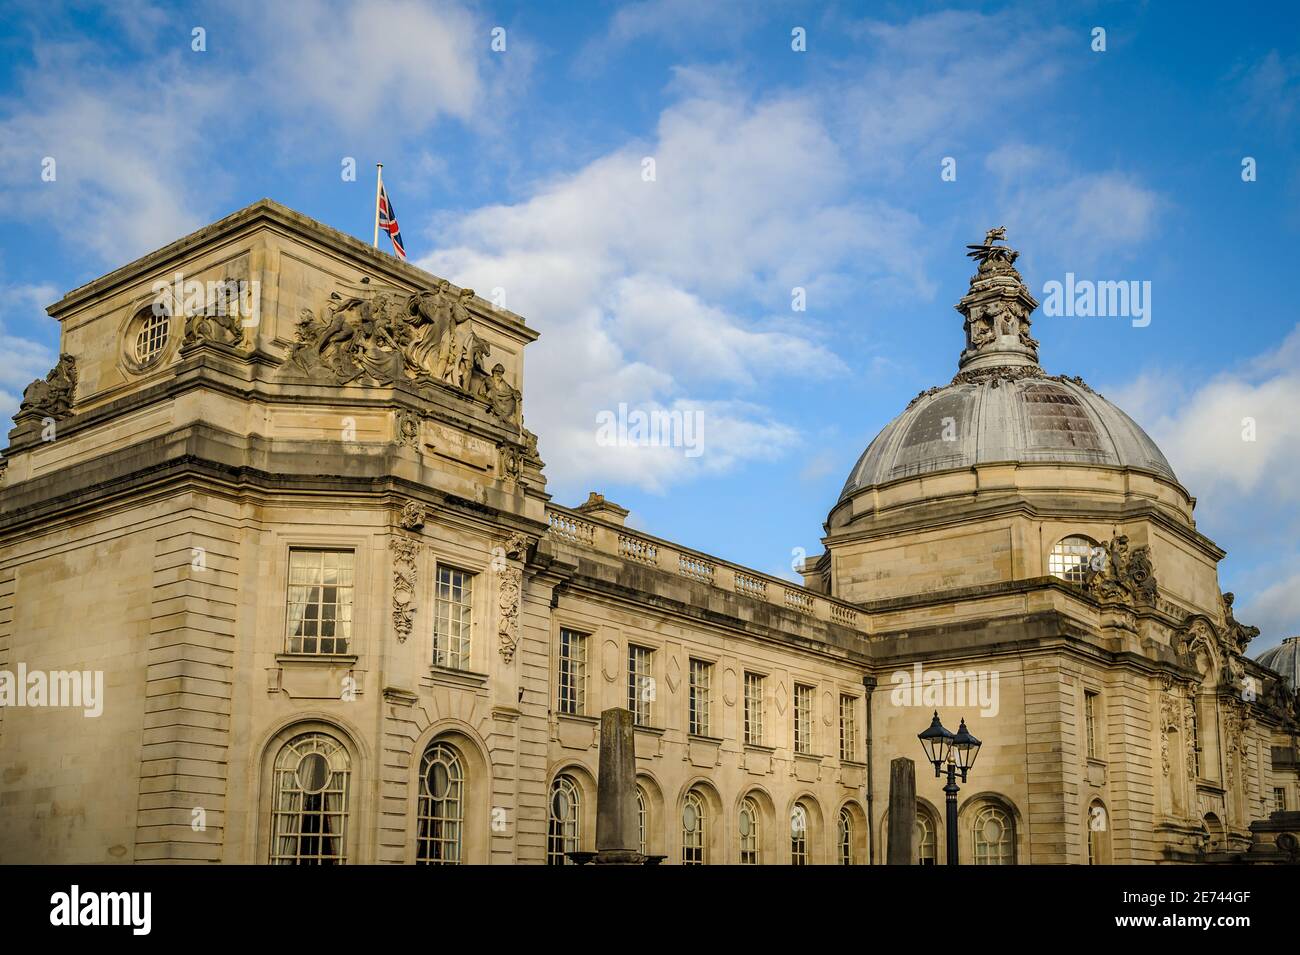 Cardiff City Hall was opened in 1906 and built from Portland stone. It stands in Cathays Park in the civic centre. Stock Photo